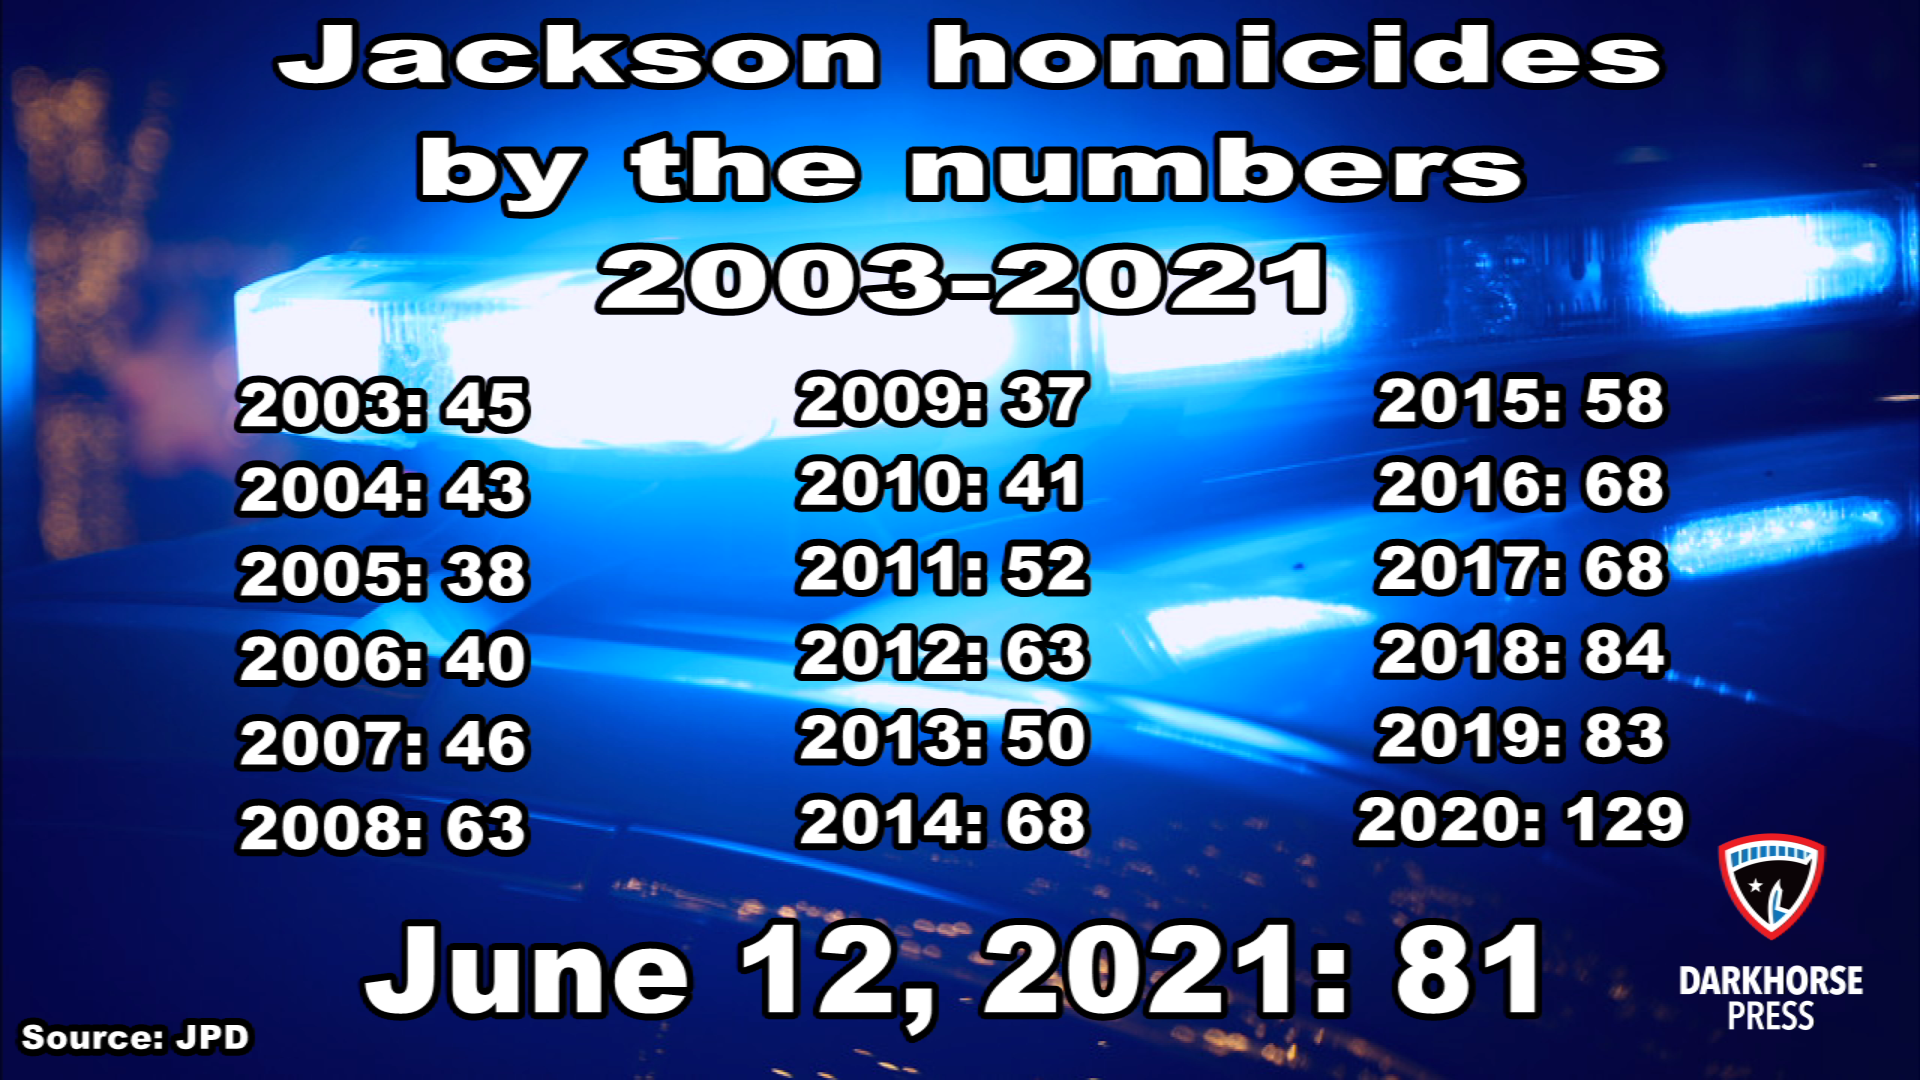 Jackson homicides through the years, by the numbers Darkhorse Press